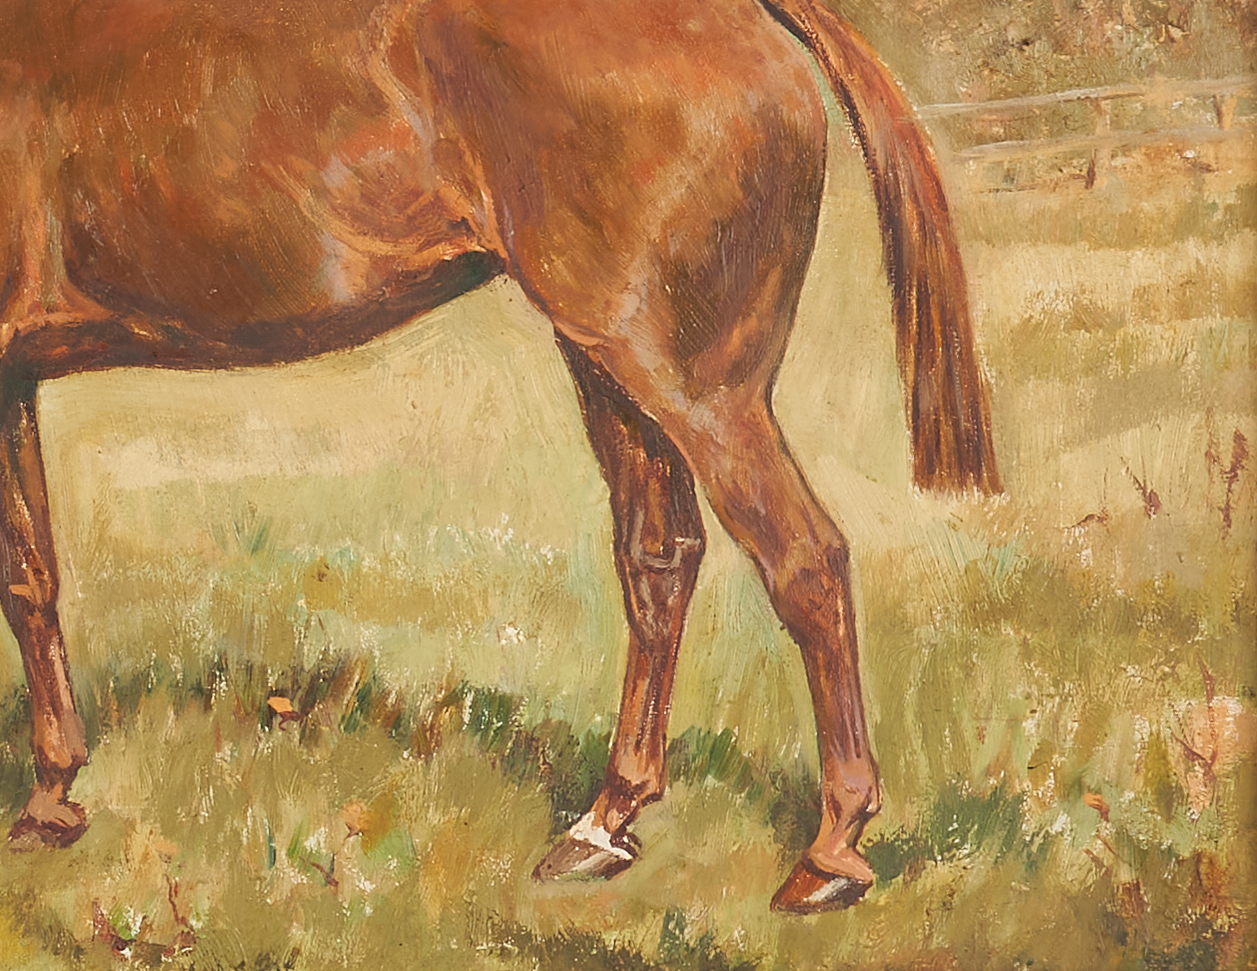 Lot 376: 2 British O/C Horse Portraits by Collier, Trickett